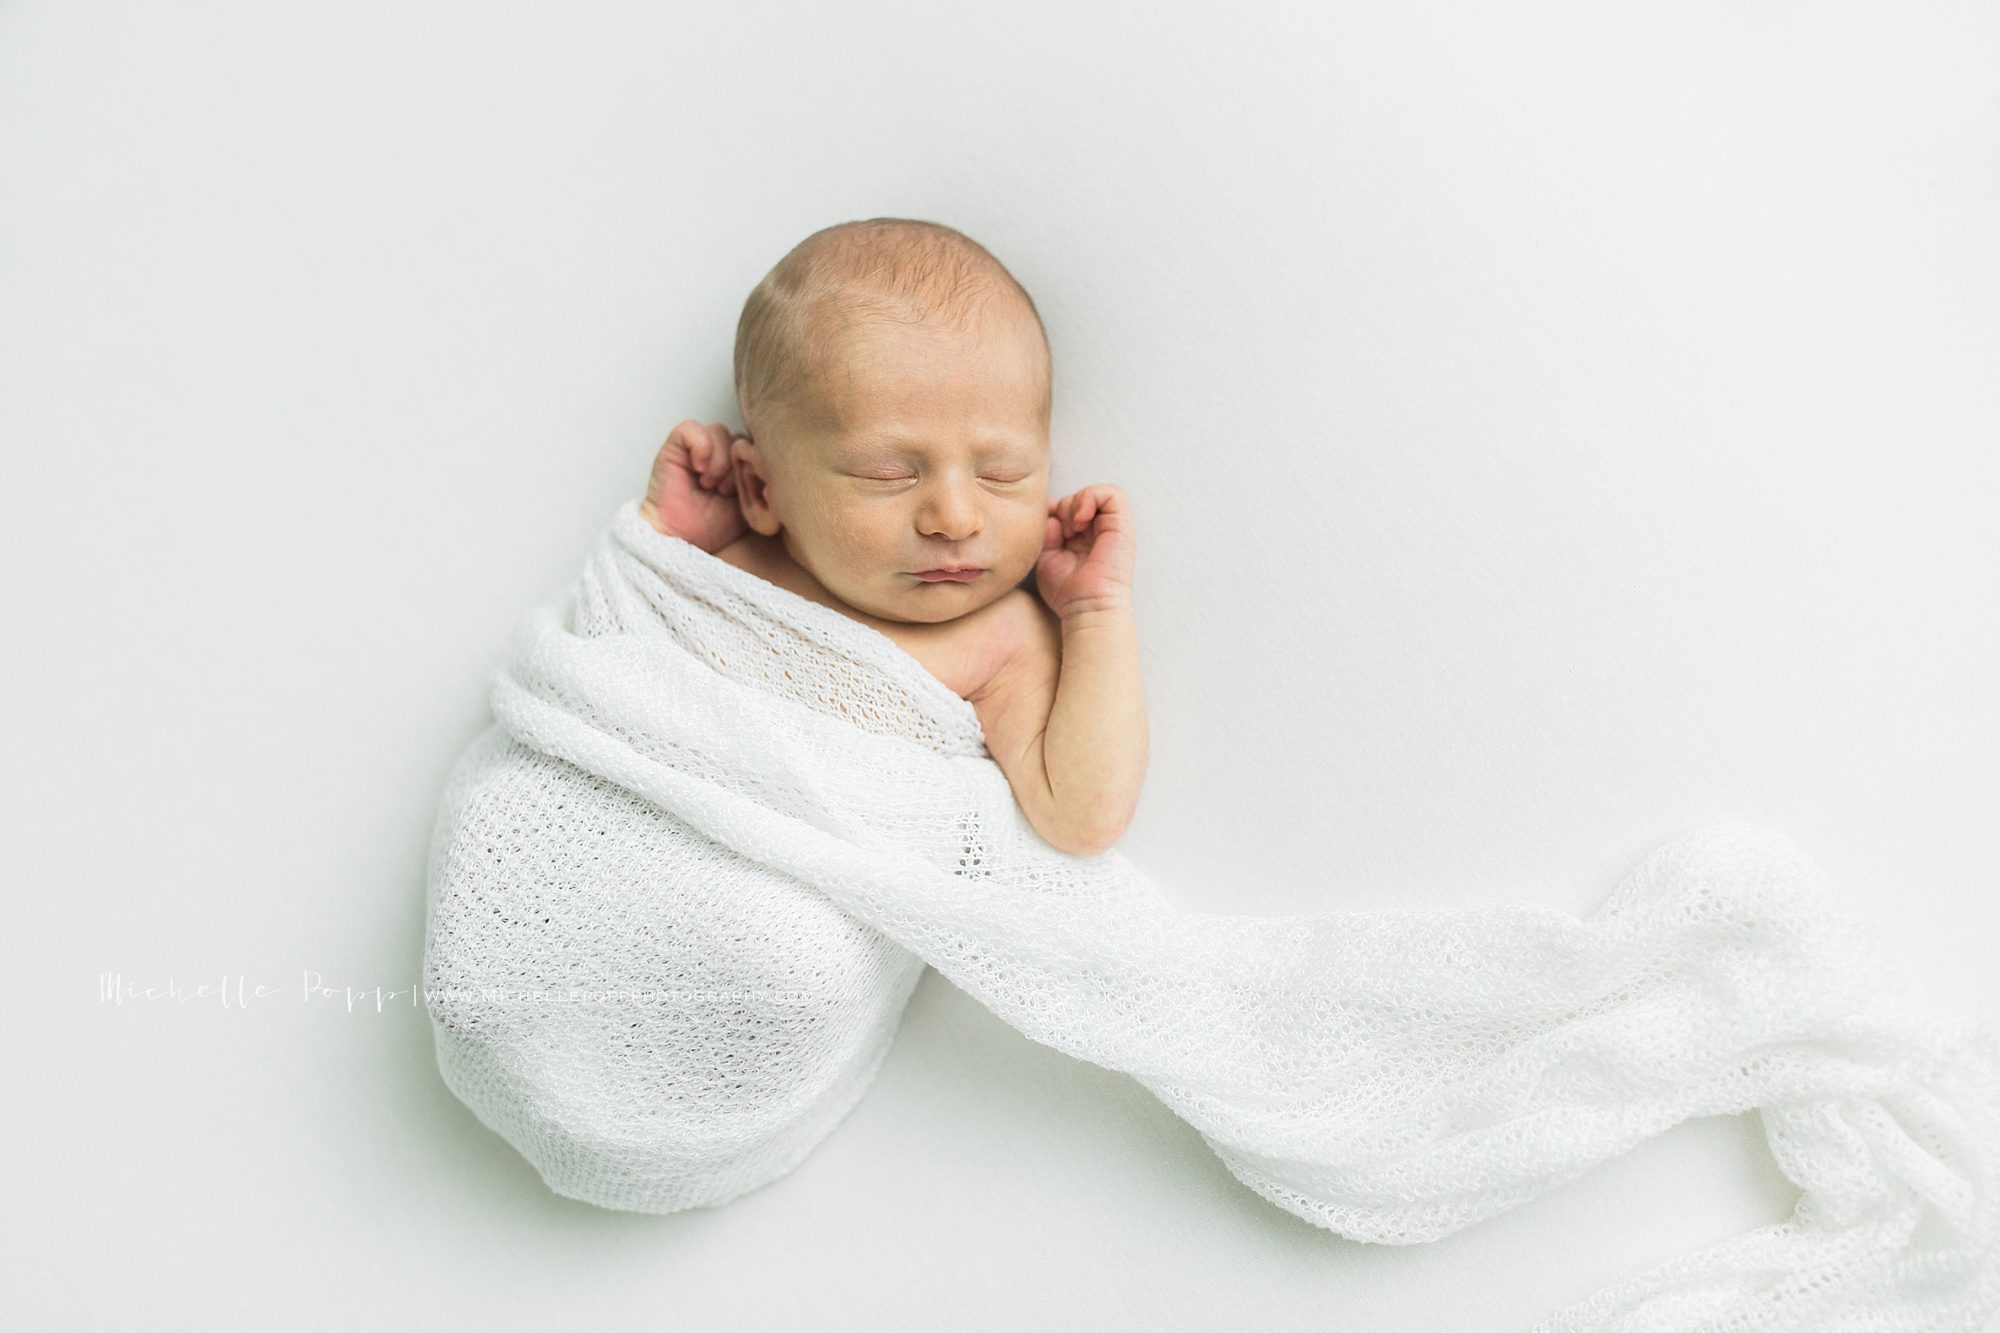 Baby in unraveling white swaddling